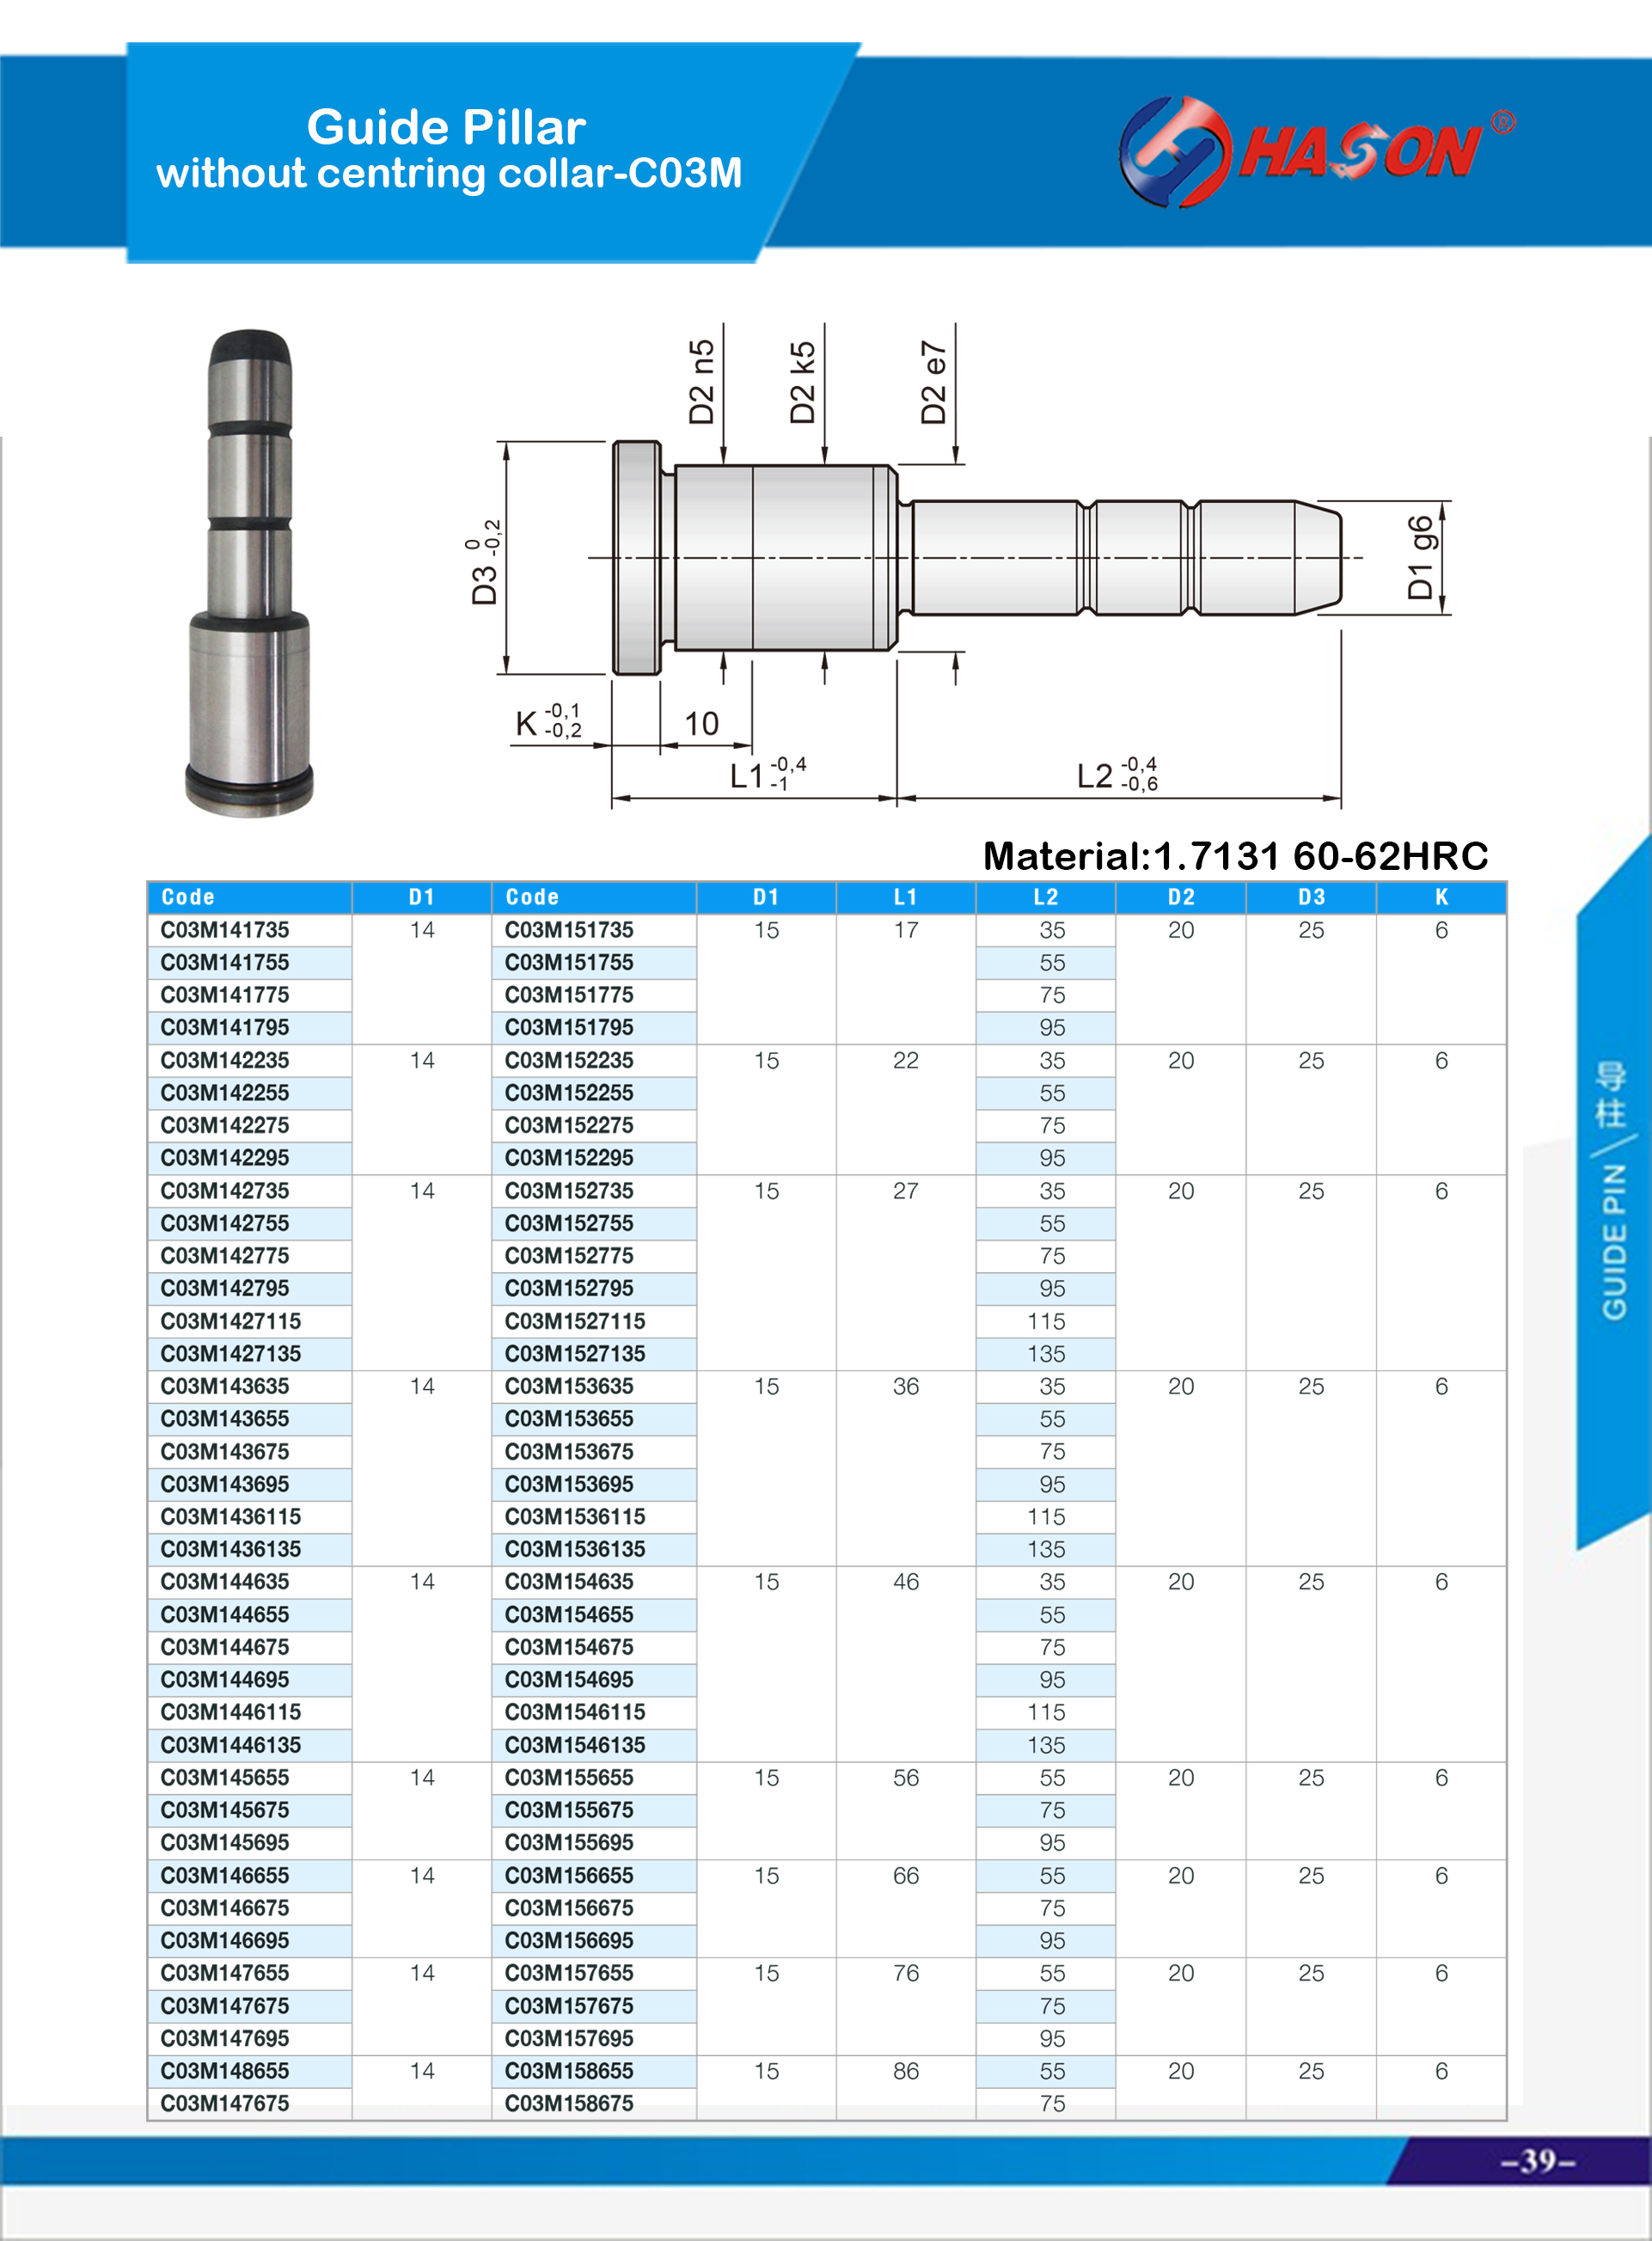 Guide Pillar without centring collar- C03M